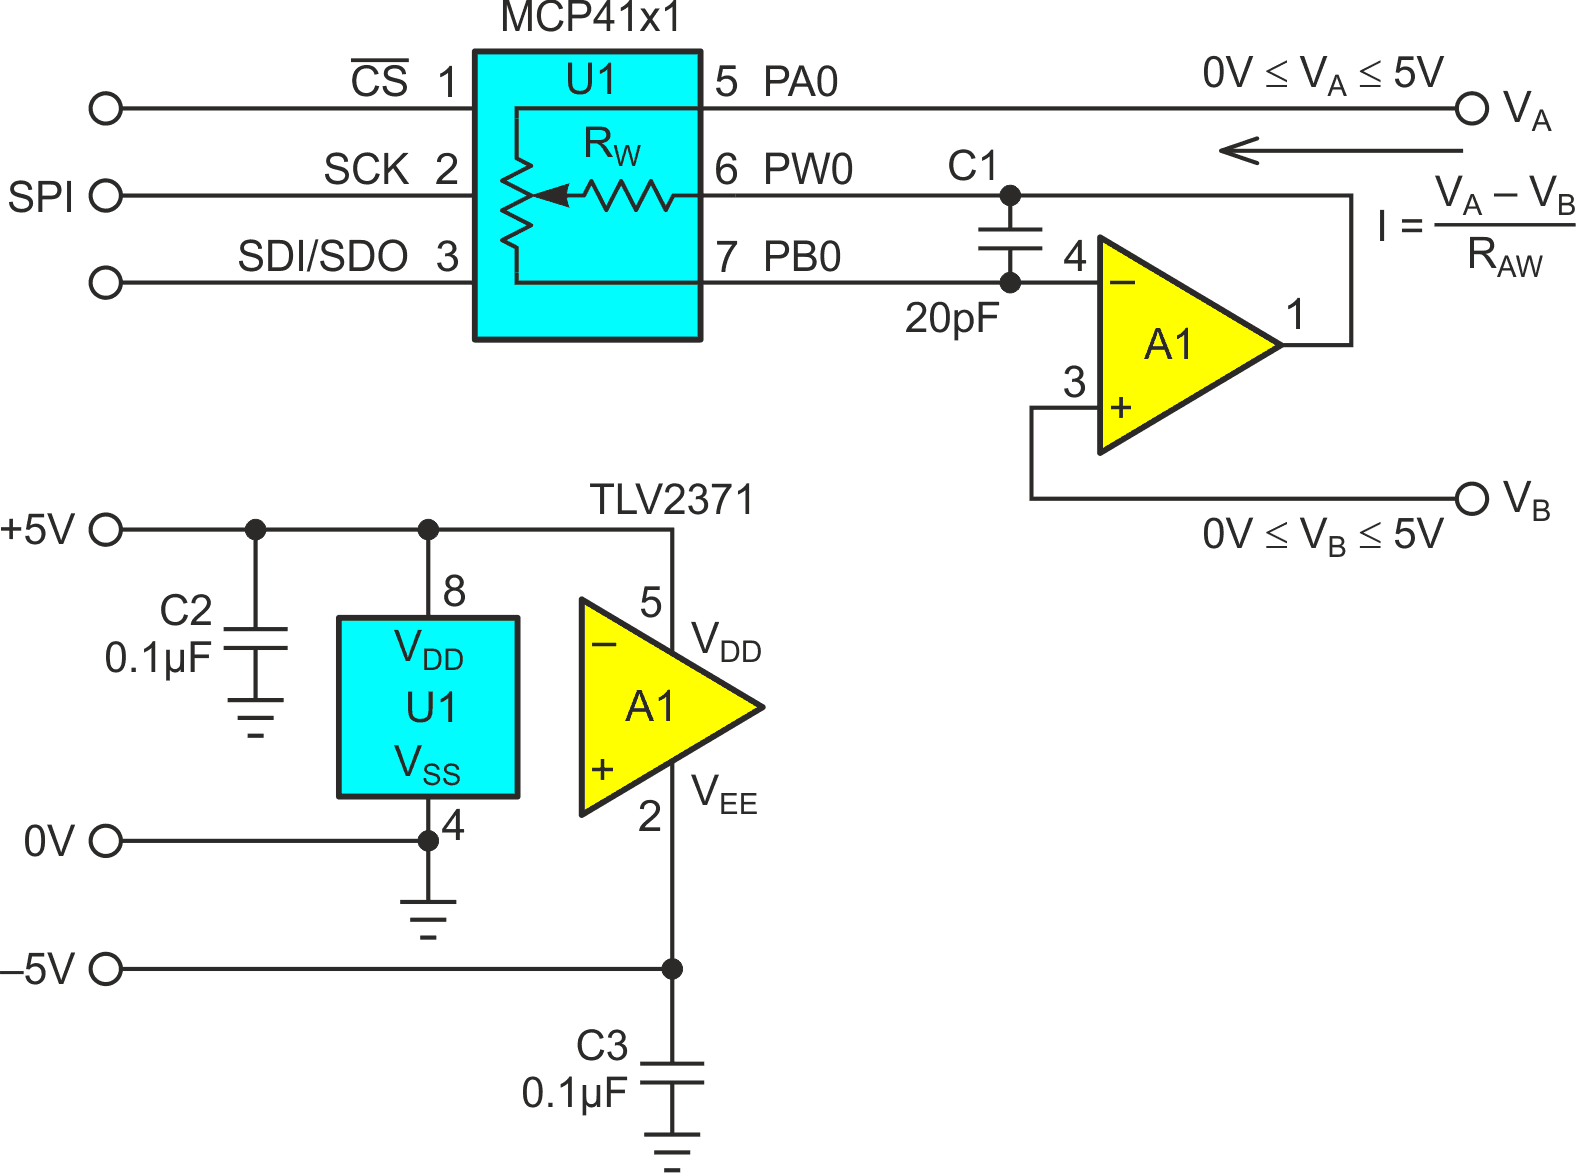 Op-amp wipes out DPOT wiper resistance